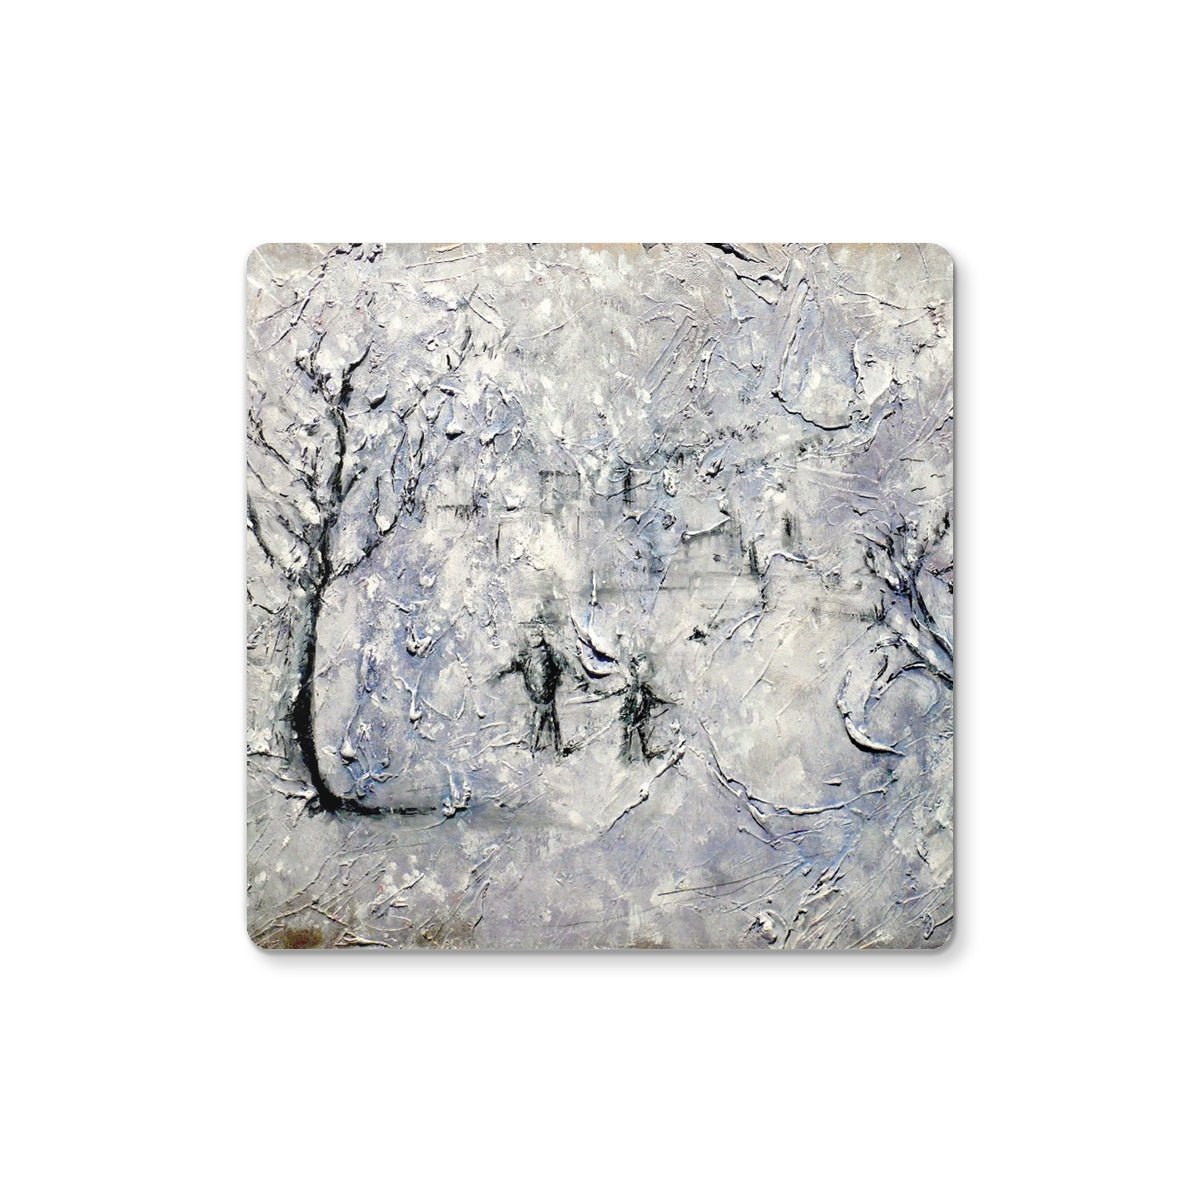 Father Daughter Snow Art Gifts Coaster-Coasters-Abstract & Impressionistic Art Gallery-4 Coasters-Paintings, Prints, Homeware, Art Gifts From Scotland By Scottish Artist Kevin Hunter